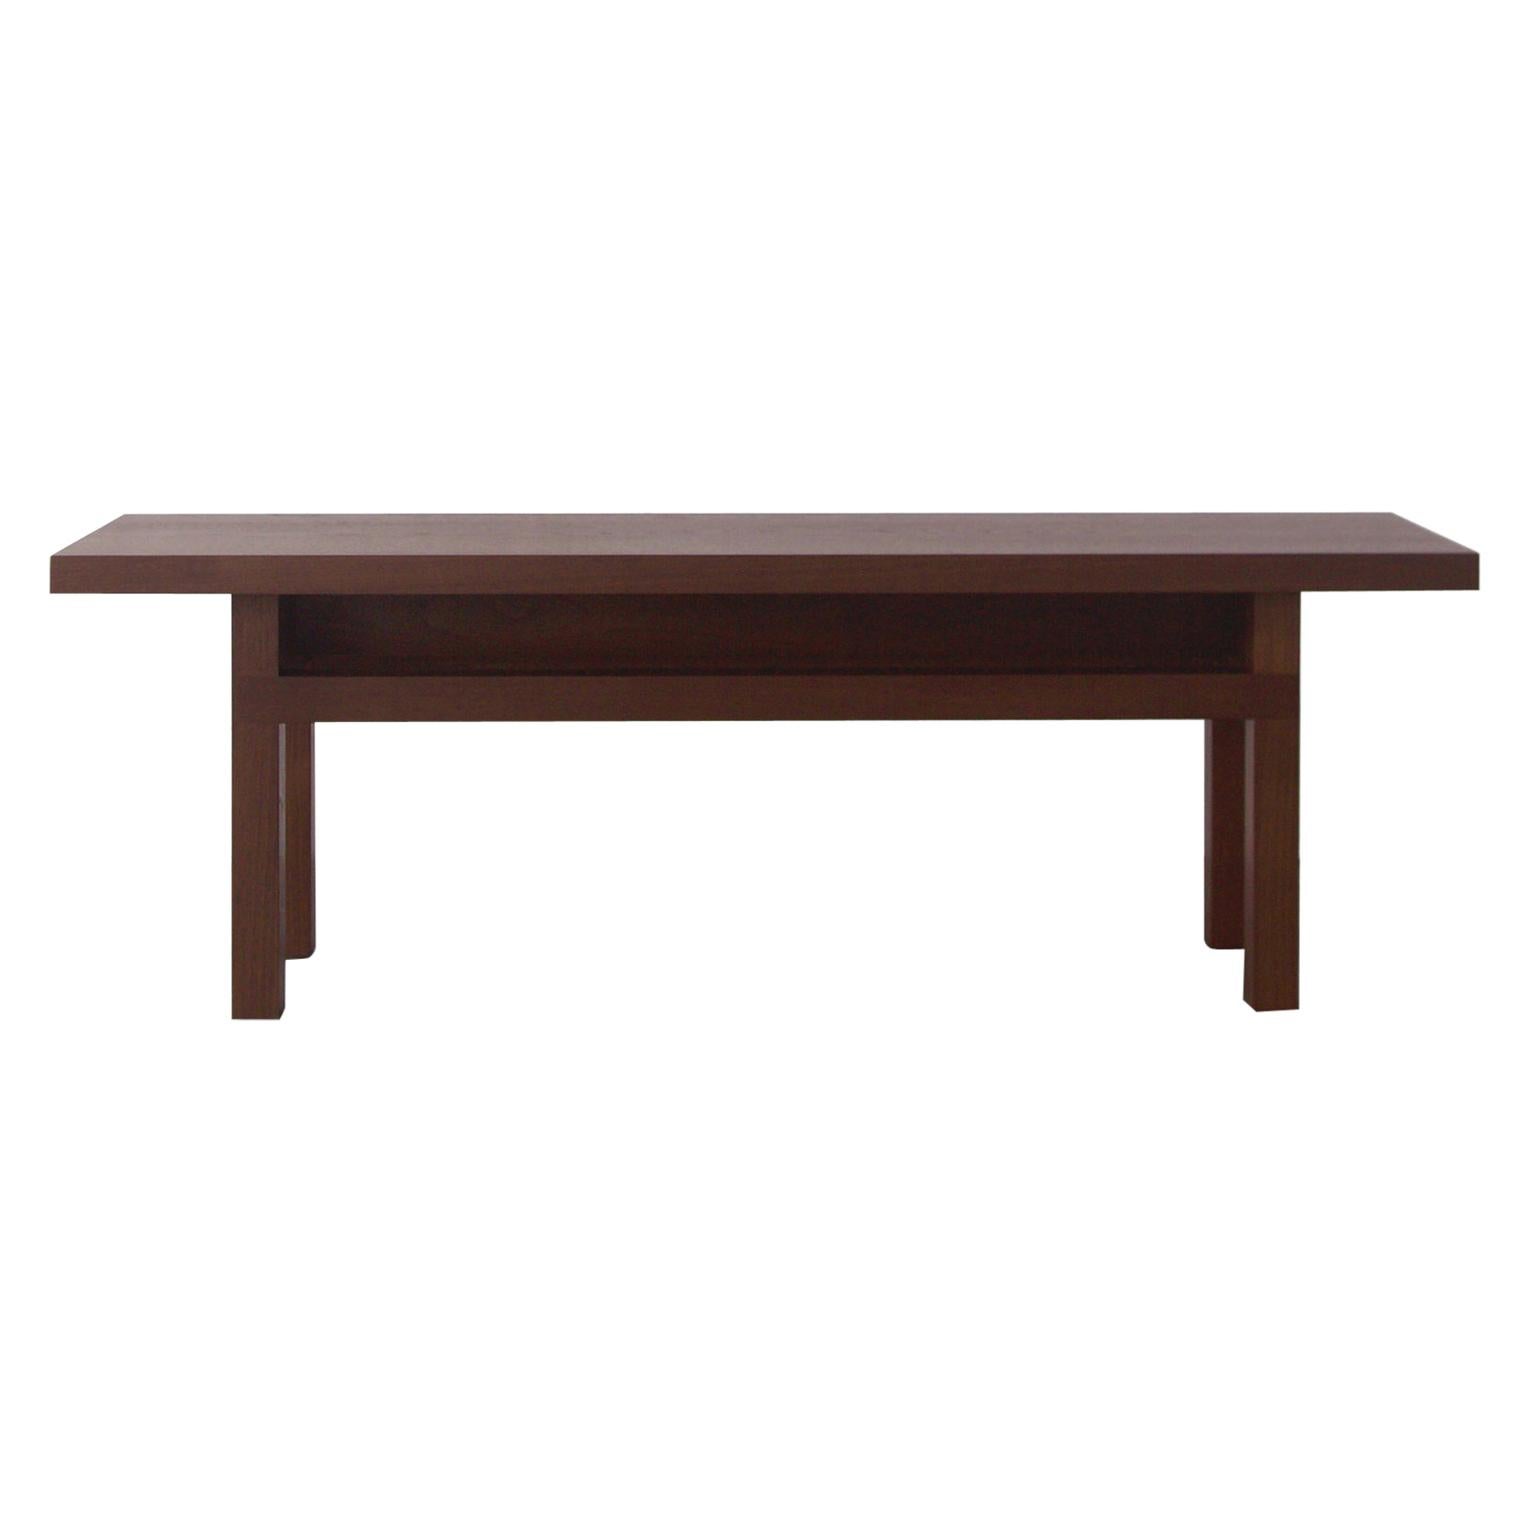 Solid Wood Contemporary Bench in Walnut by Bellboy For Sale